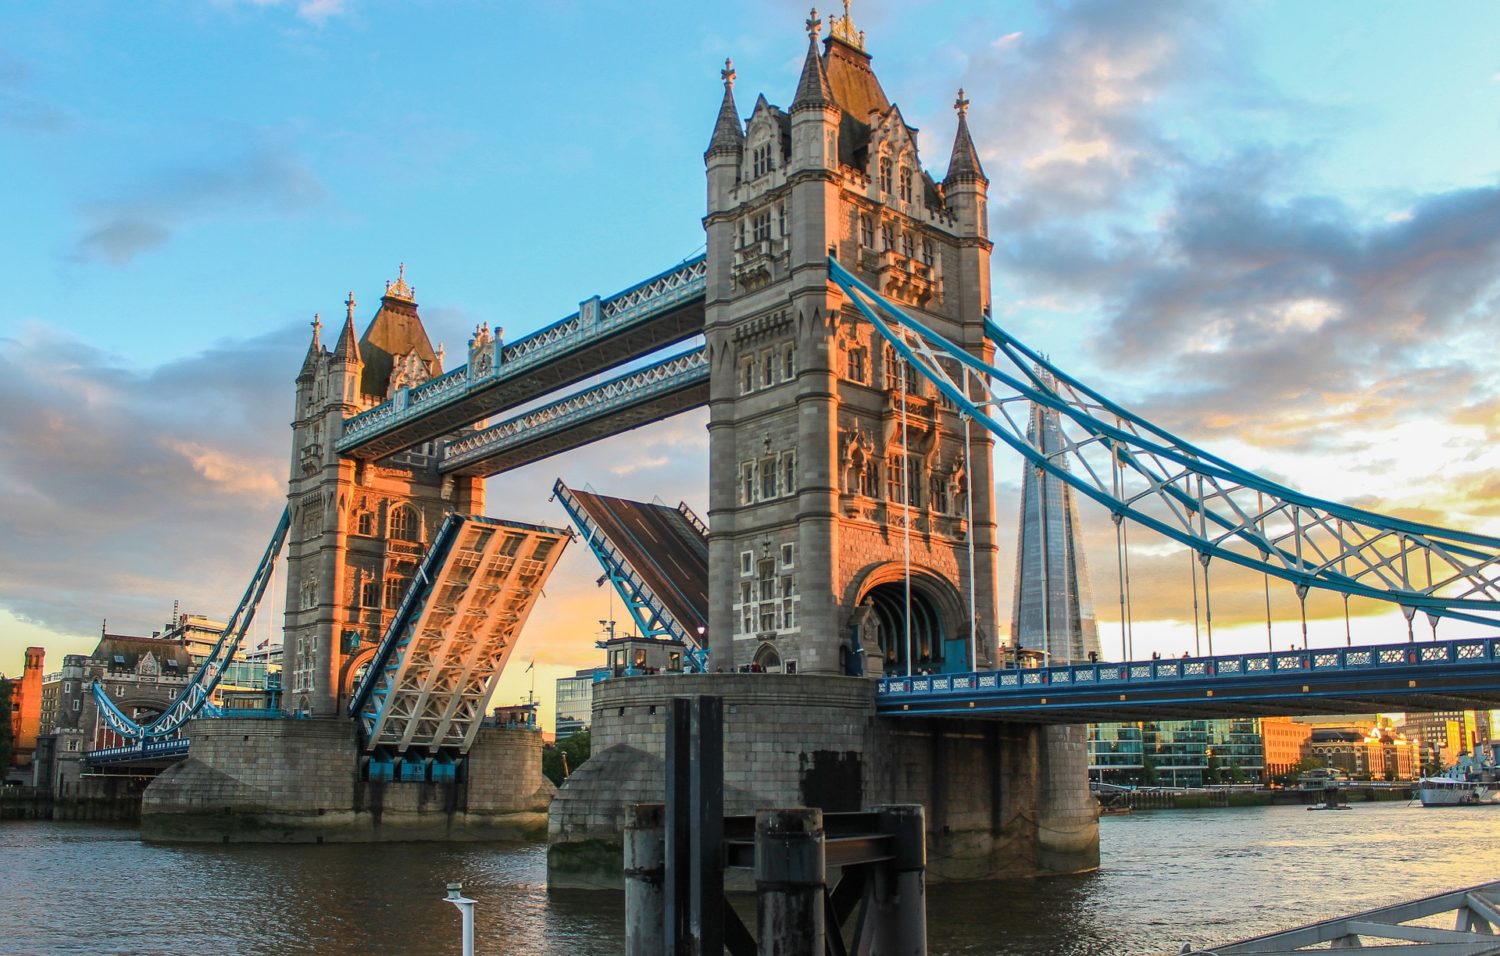 One of the most beautiful bridges in the world - Tower Bridge